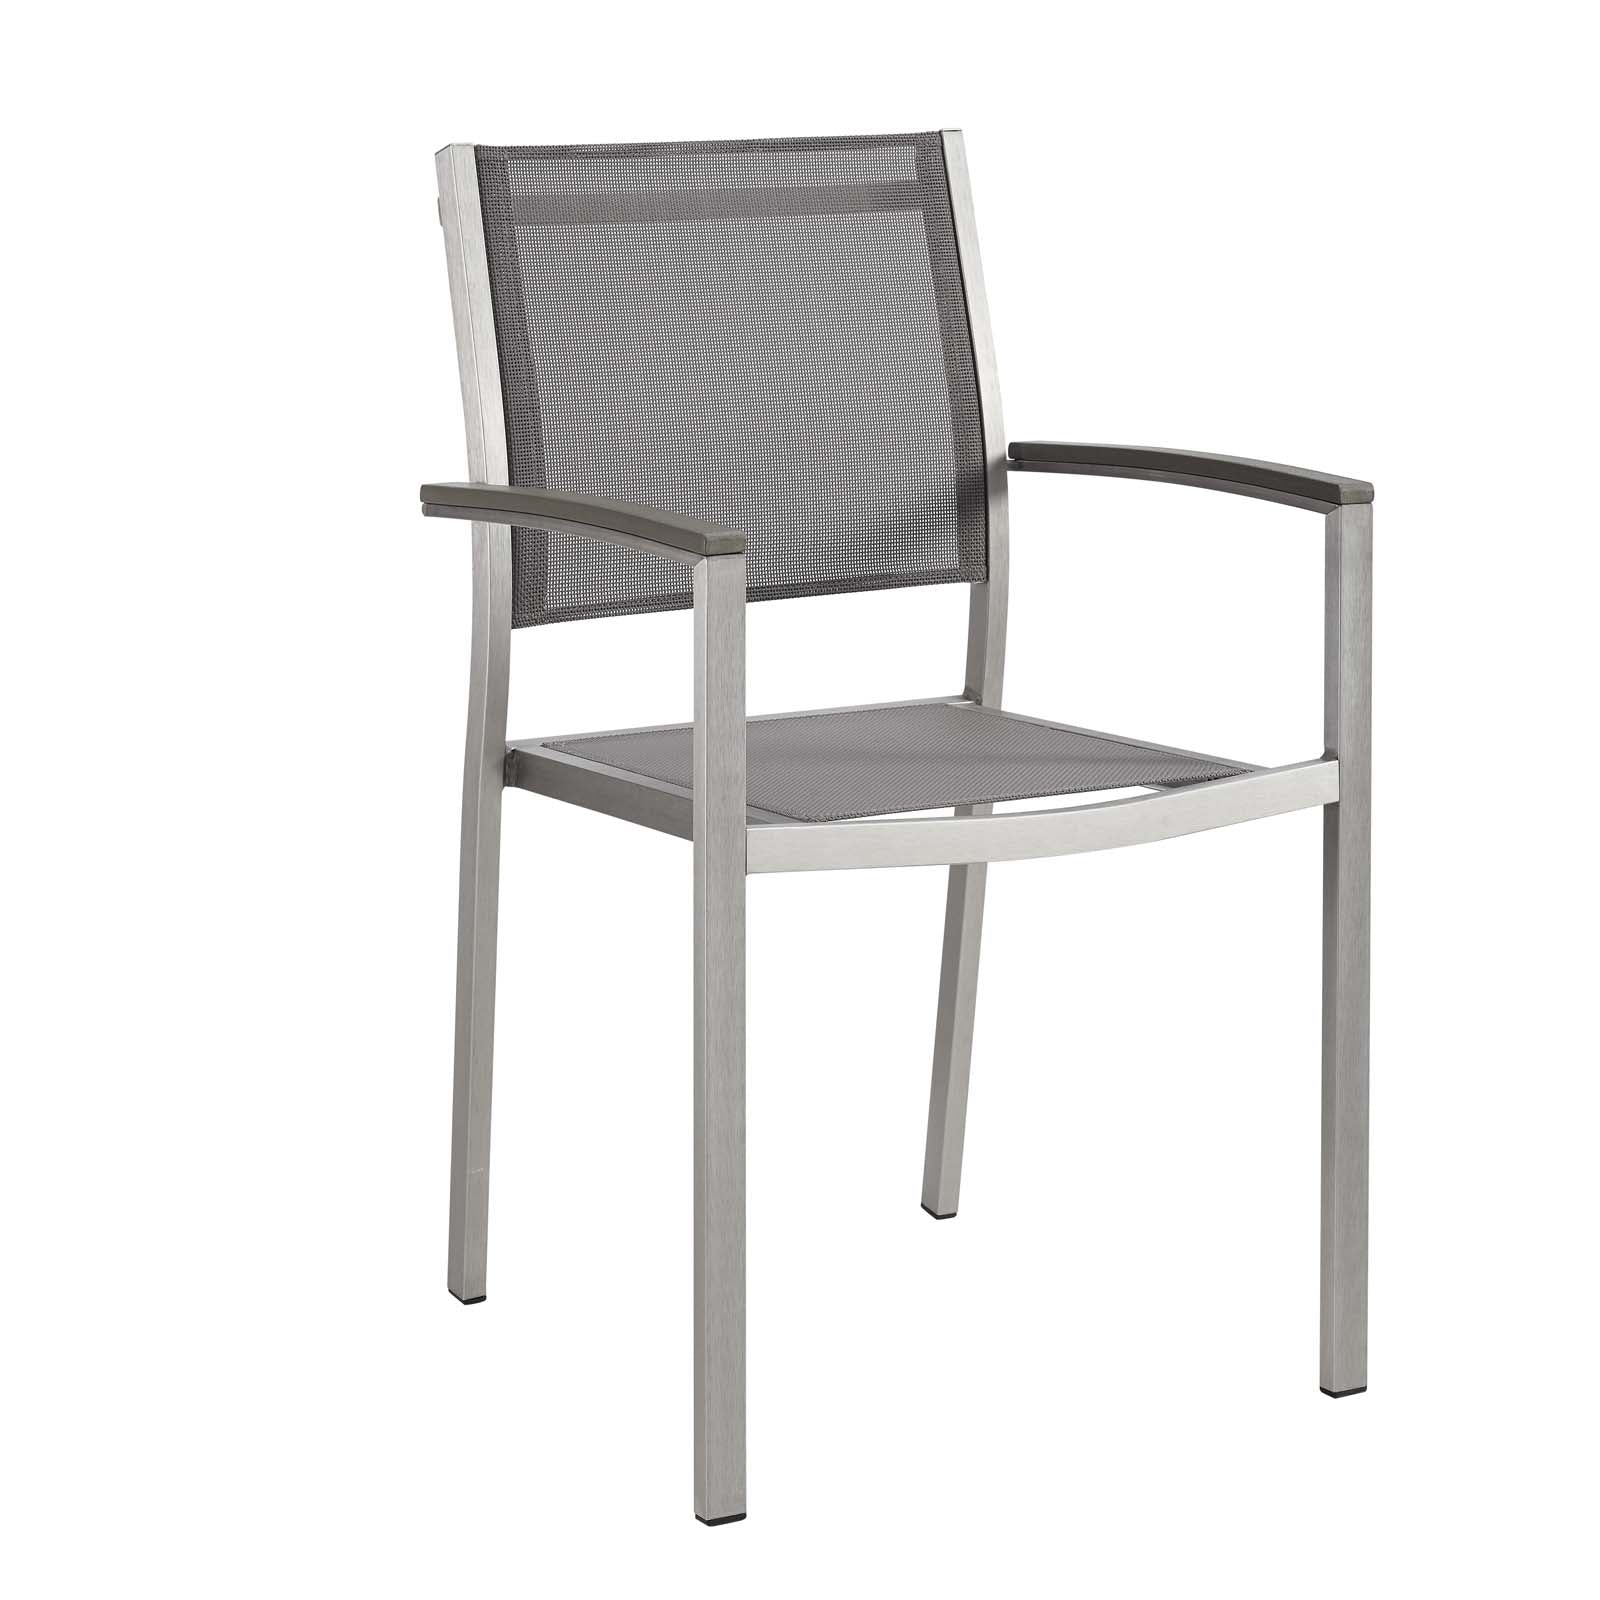 Modway Outdoor Dining Chairs - Shore Outdoor Patio Aluminum Dining Chair Silver Gray